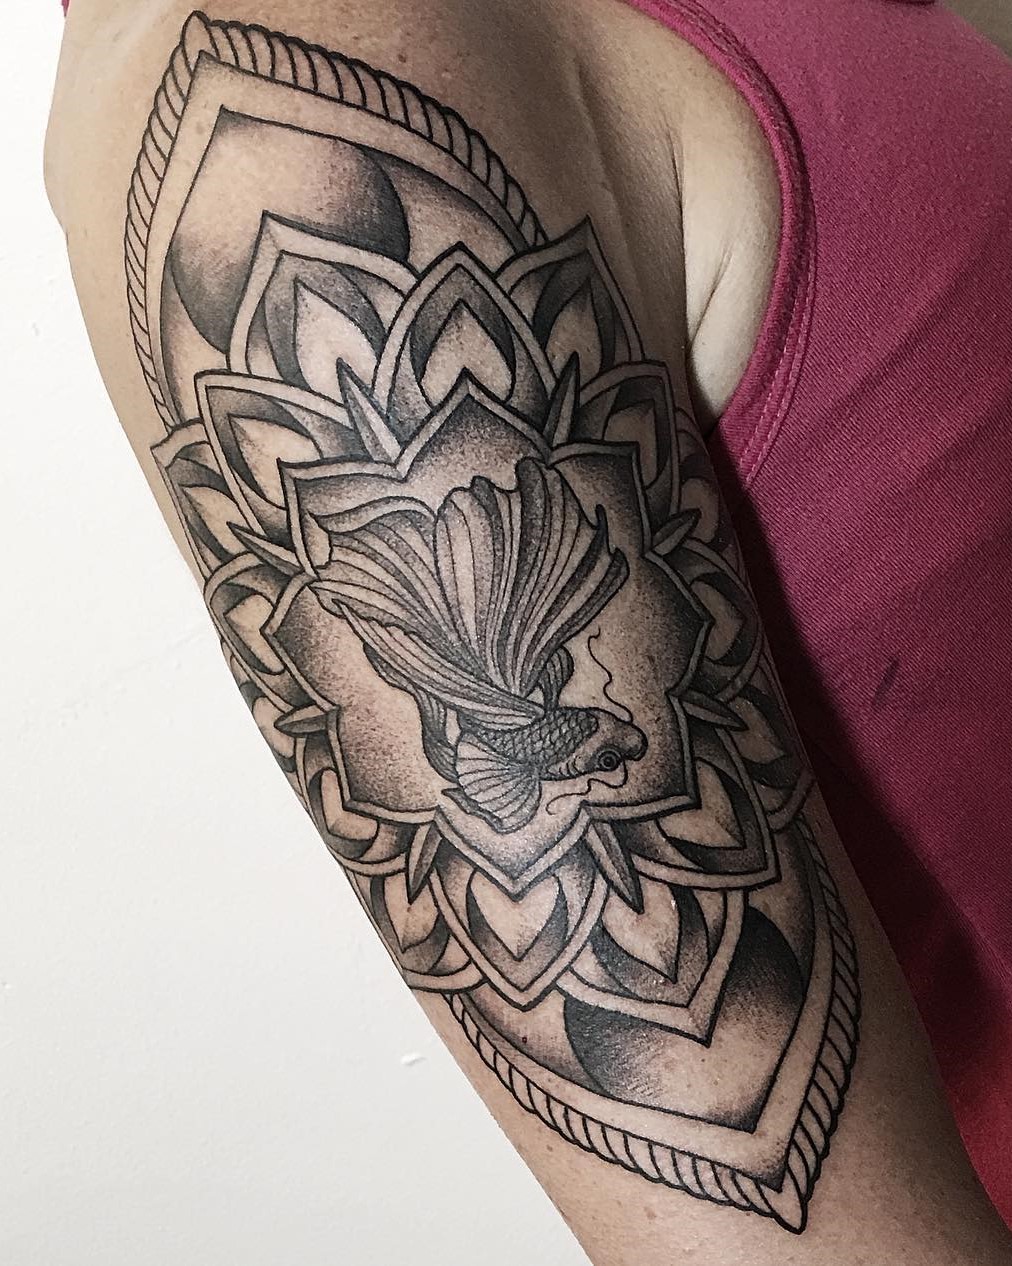 Negative space dotwork style lotus flower and butterfly tattoo -  Tattoogrid.net